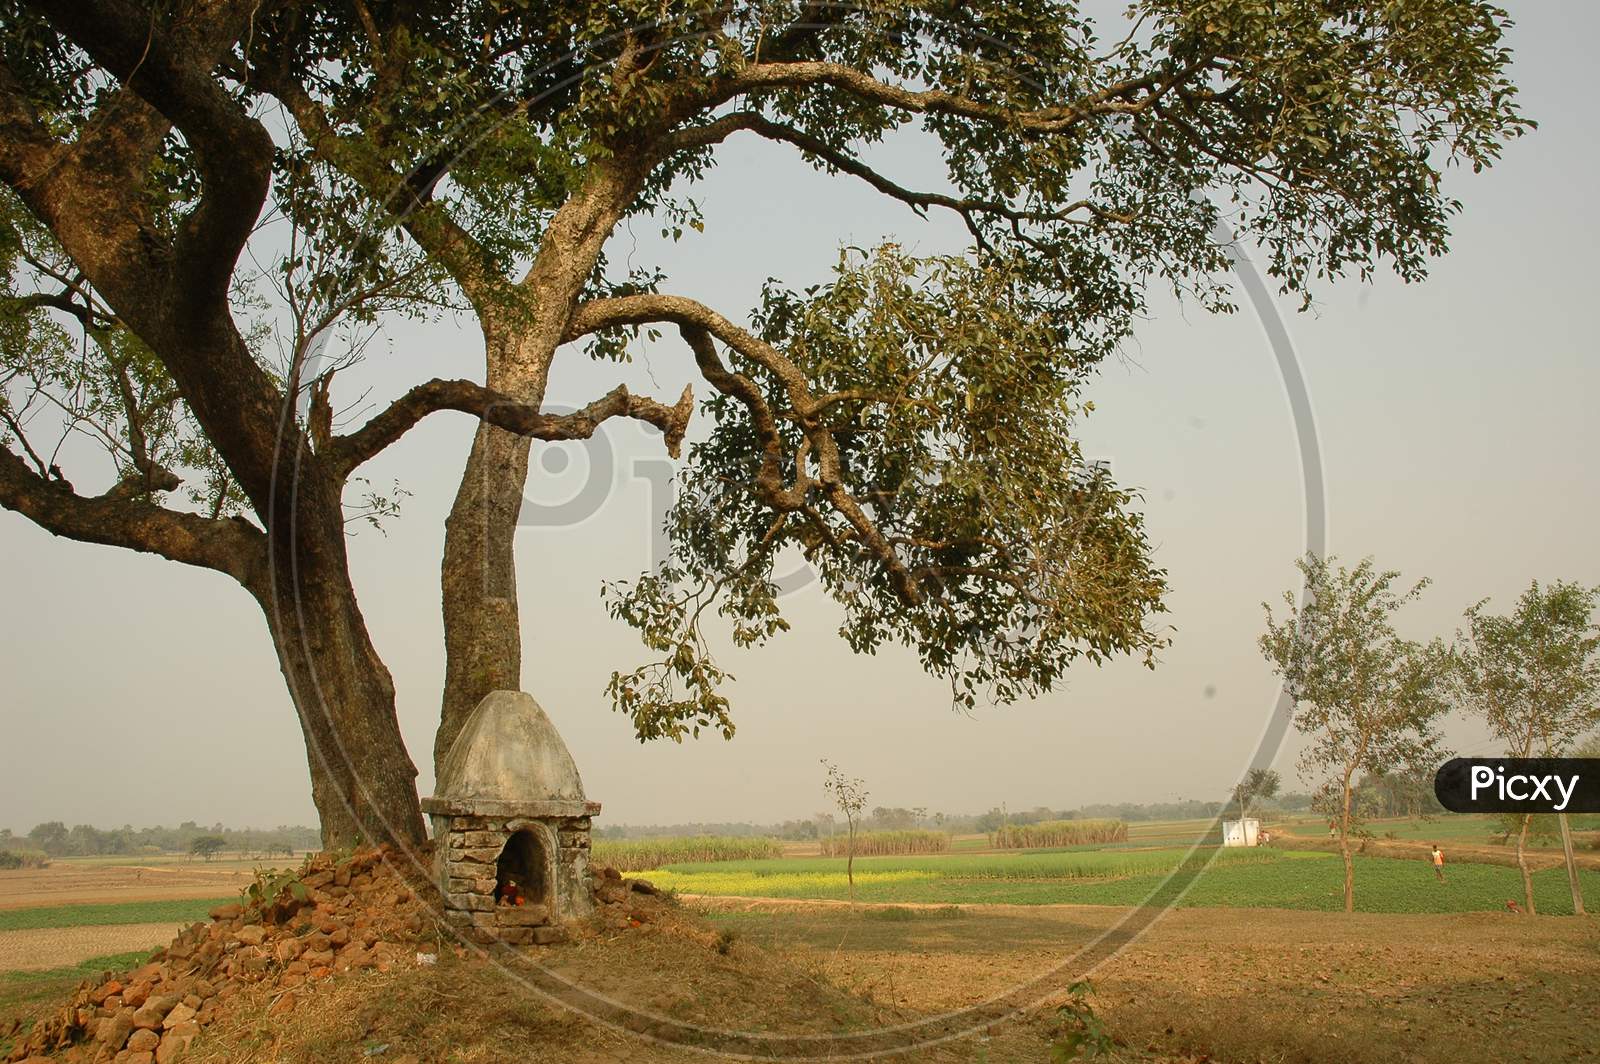 Small Temples  At Tress Near Agricultural Fields in Rural Villages Near Murshidabad , West Bengal